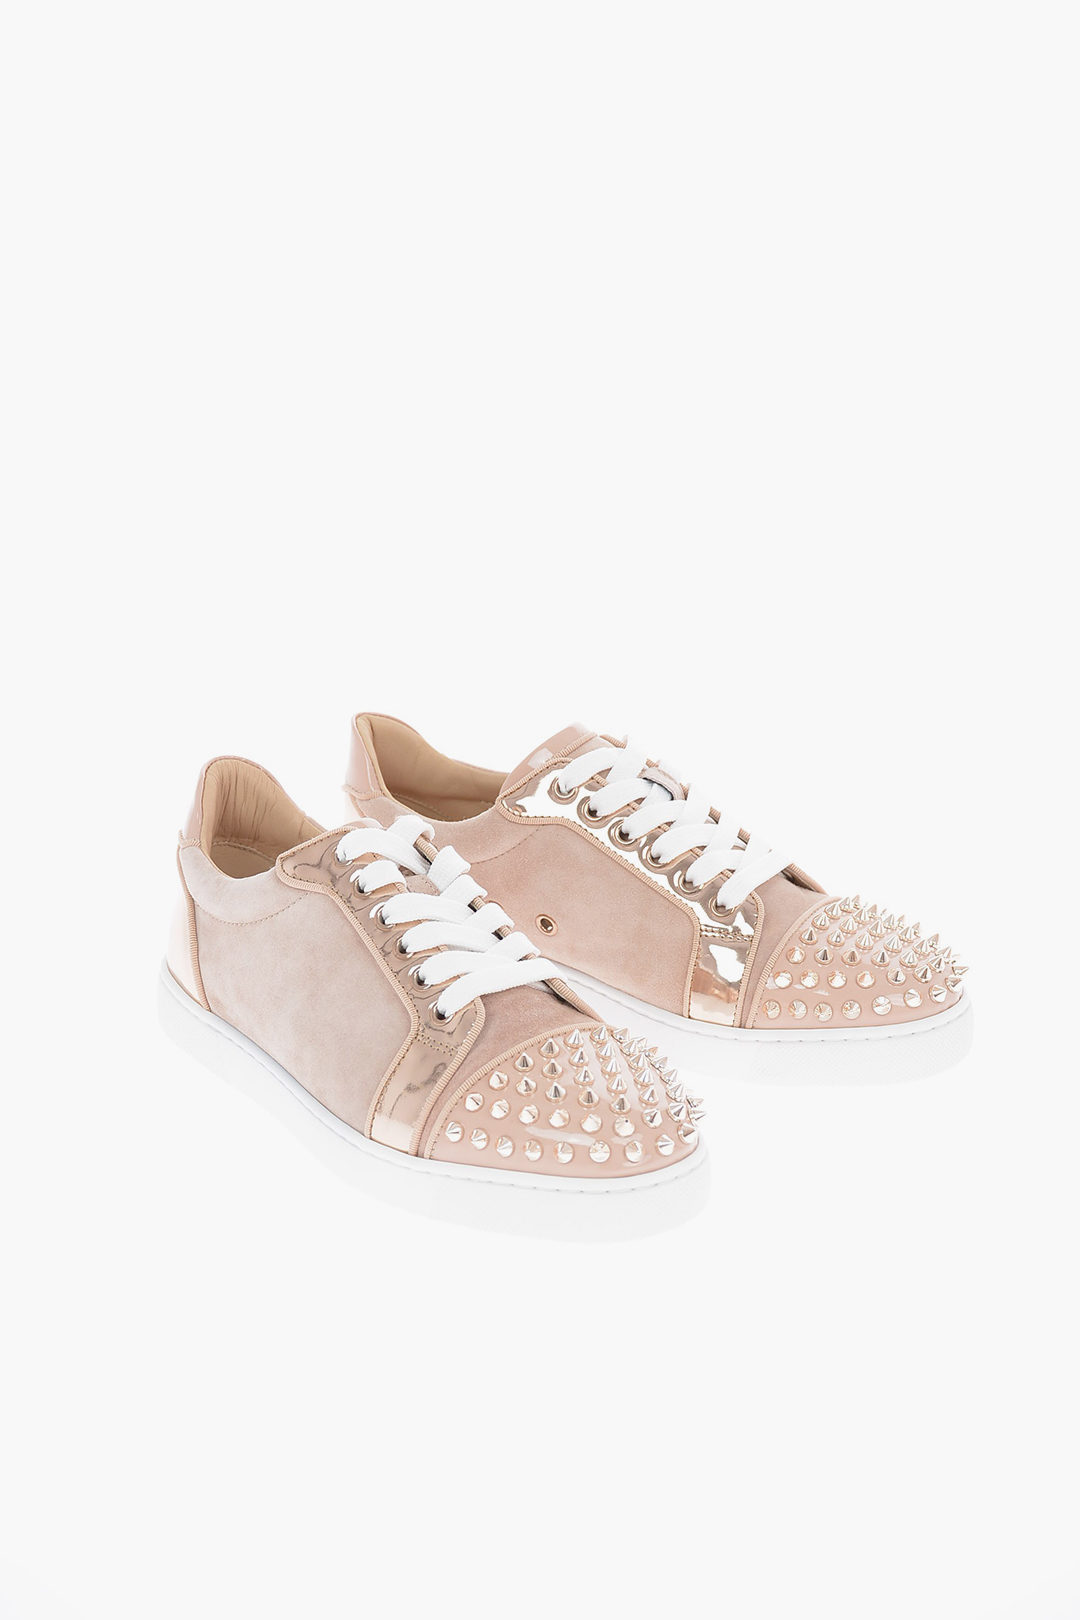 Christian Louboutin Leather Studded VIEIRA SPIKES Sneakers women - Glamood  Outlet